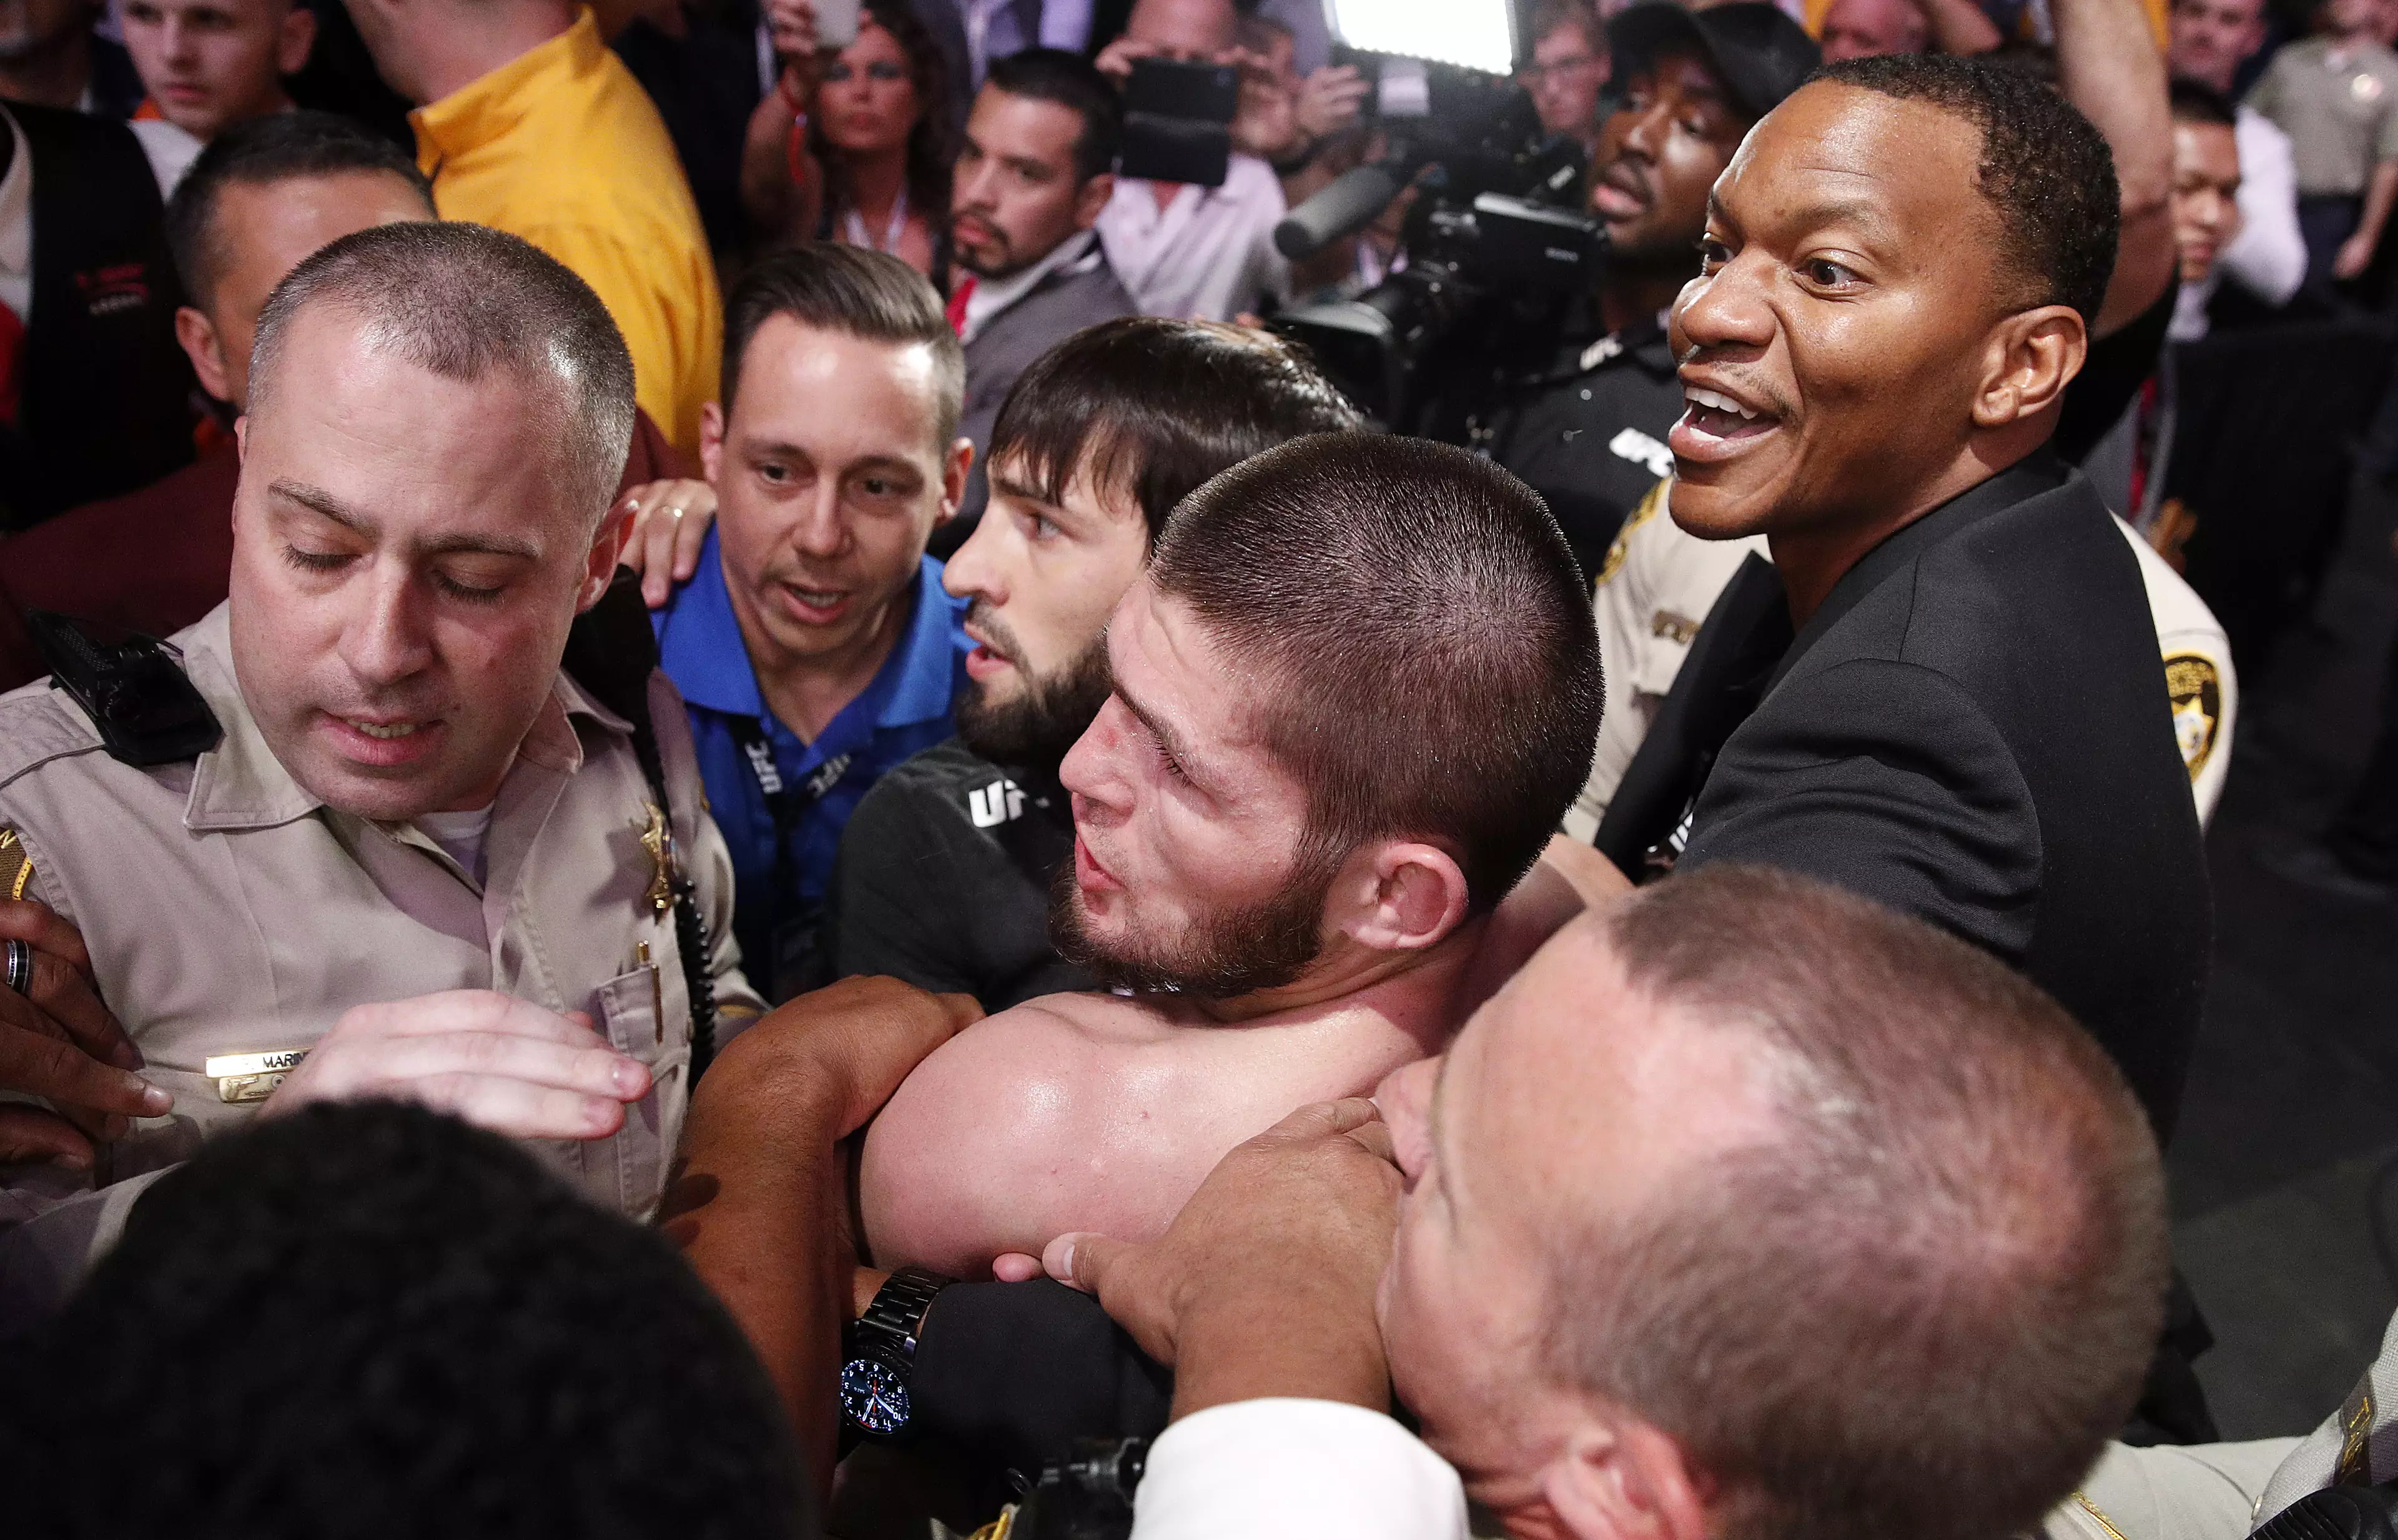 Security hold back Khabib after the incident. Image: PA Images